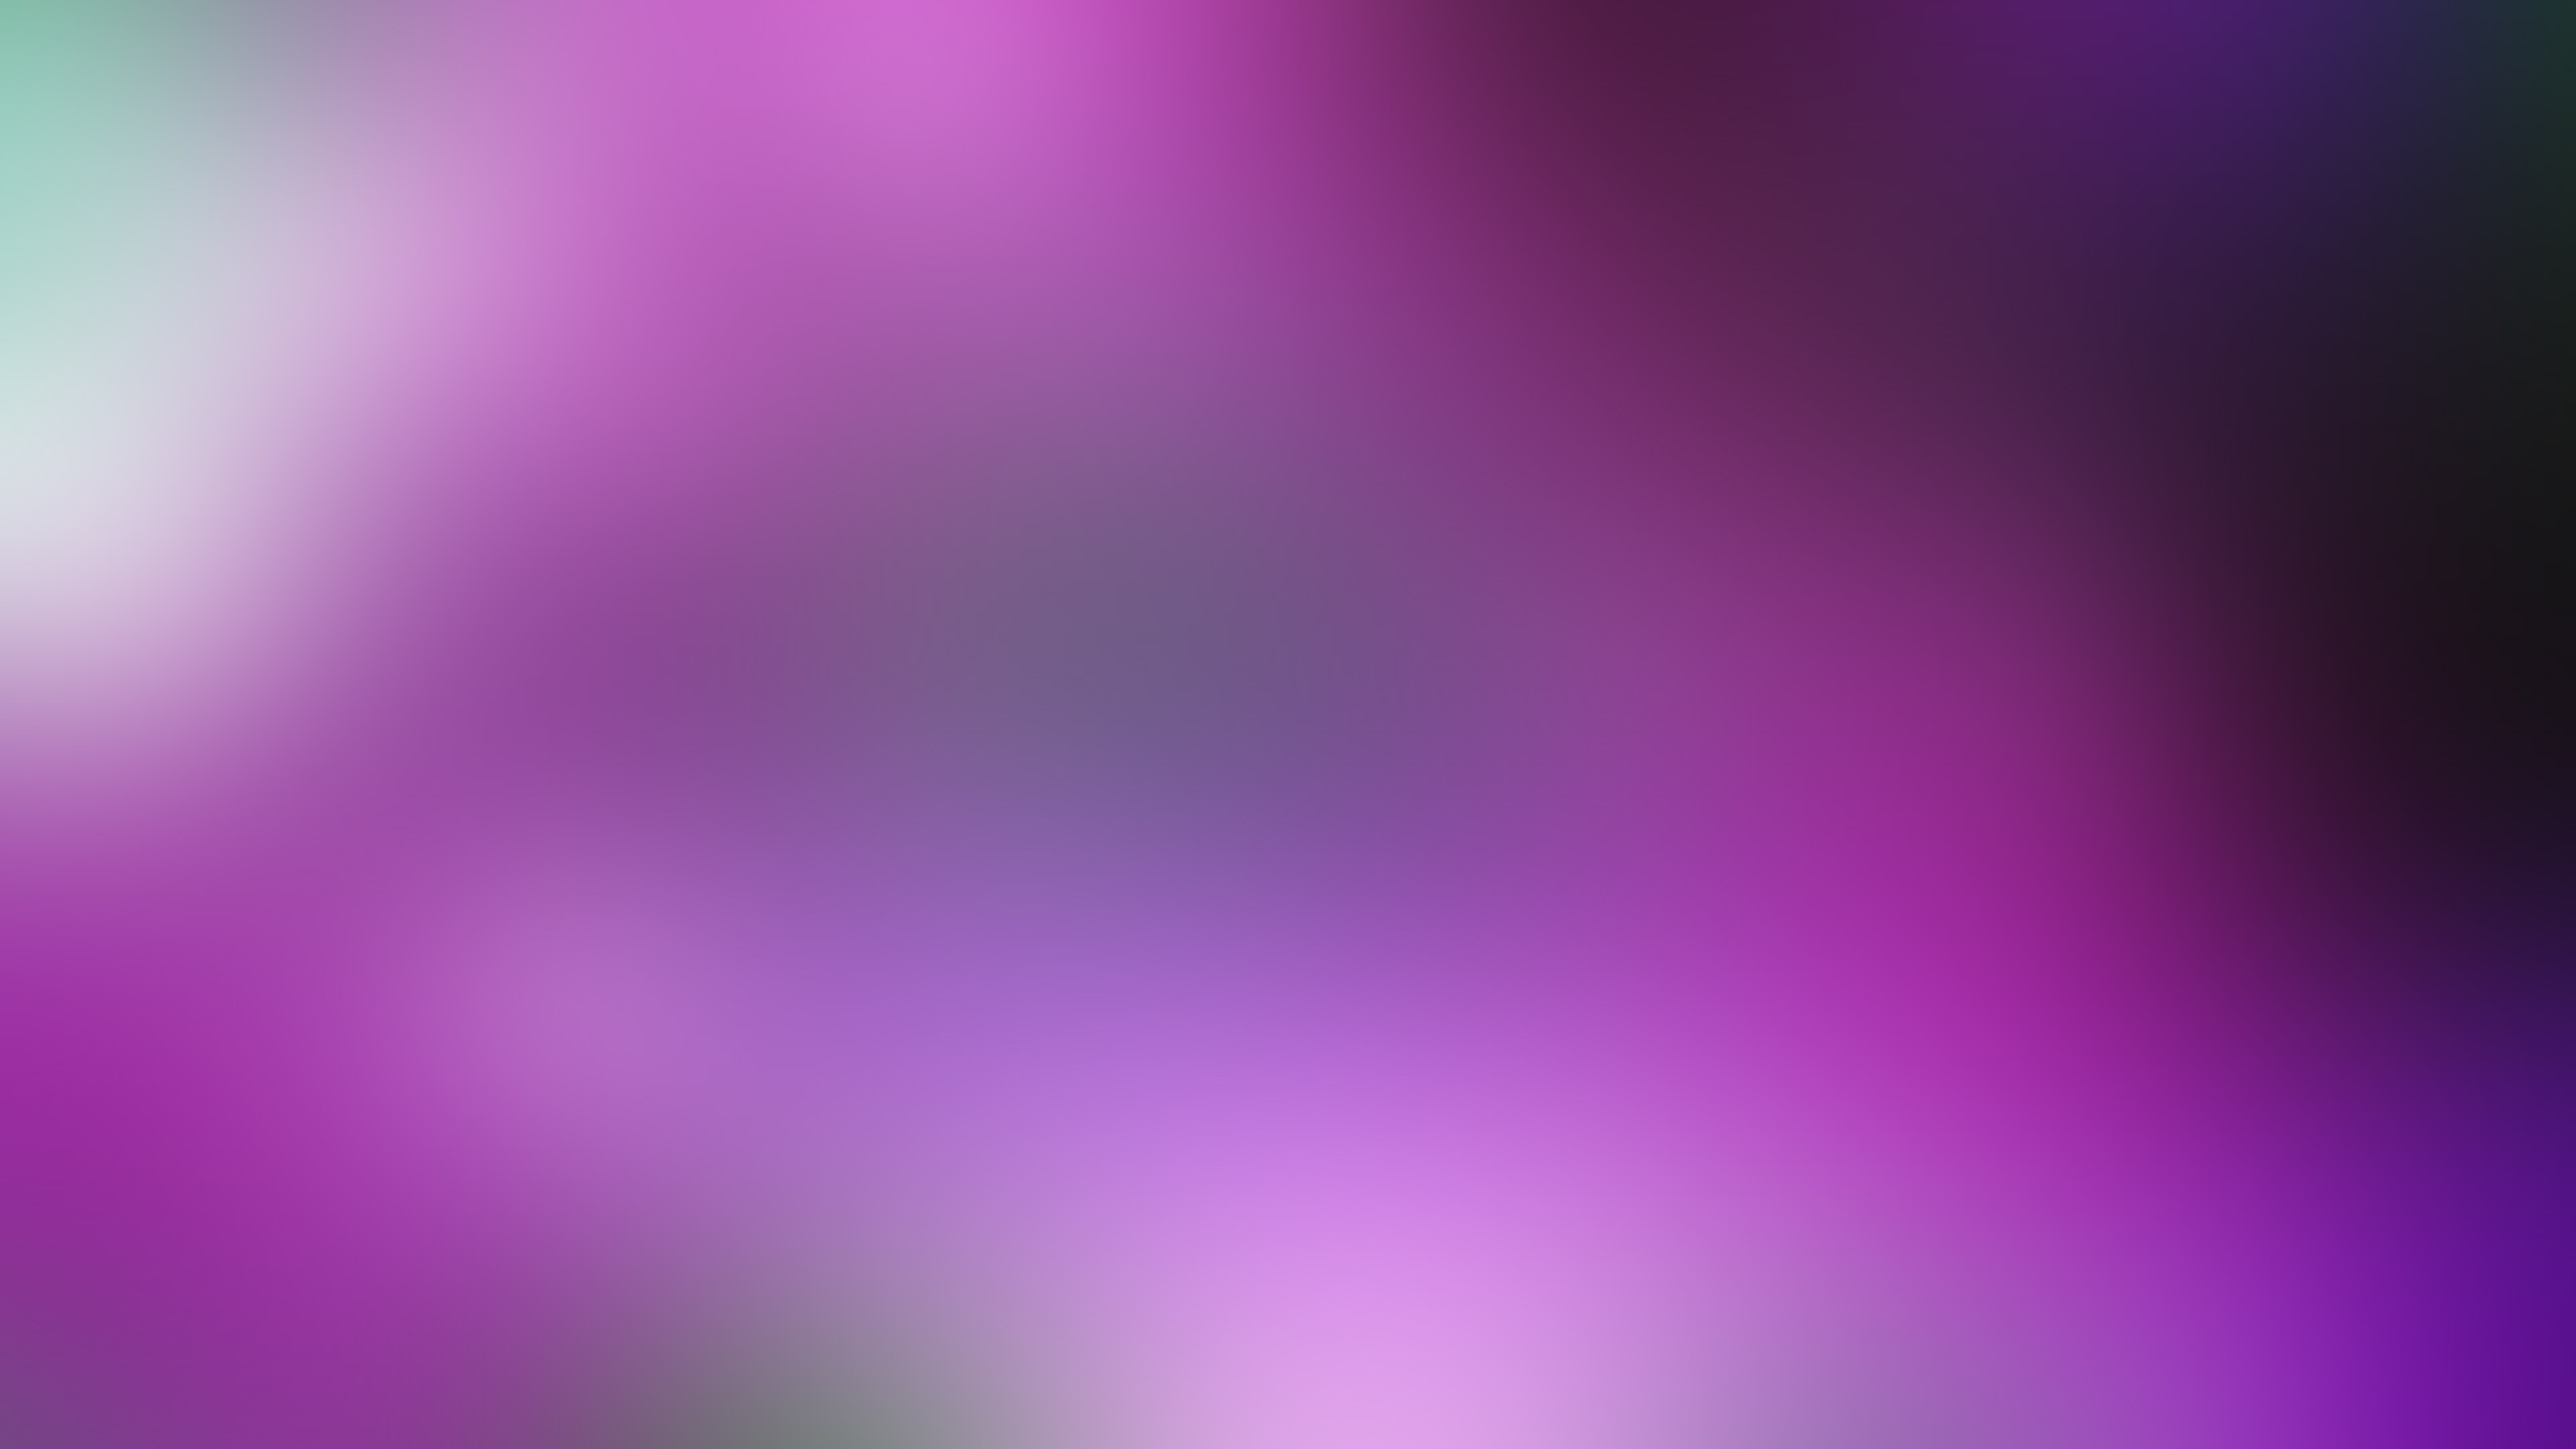 Download Wallpaper 3840x2160 Lilac Spots Background